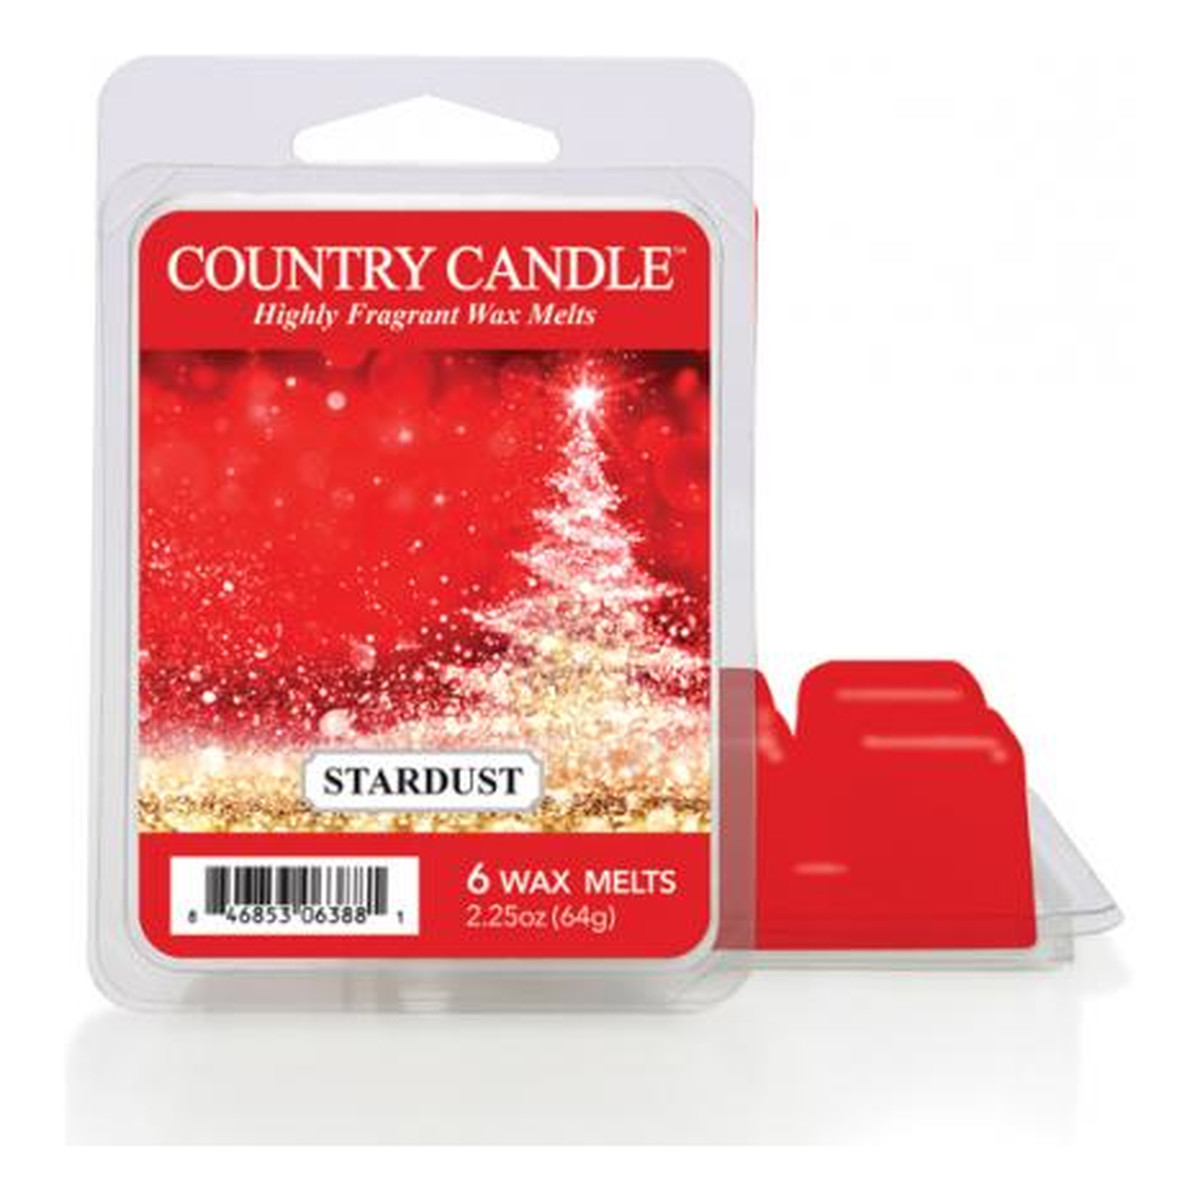 Country Candle Wax wosk zapachowy "potpourri" stardust 64g